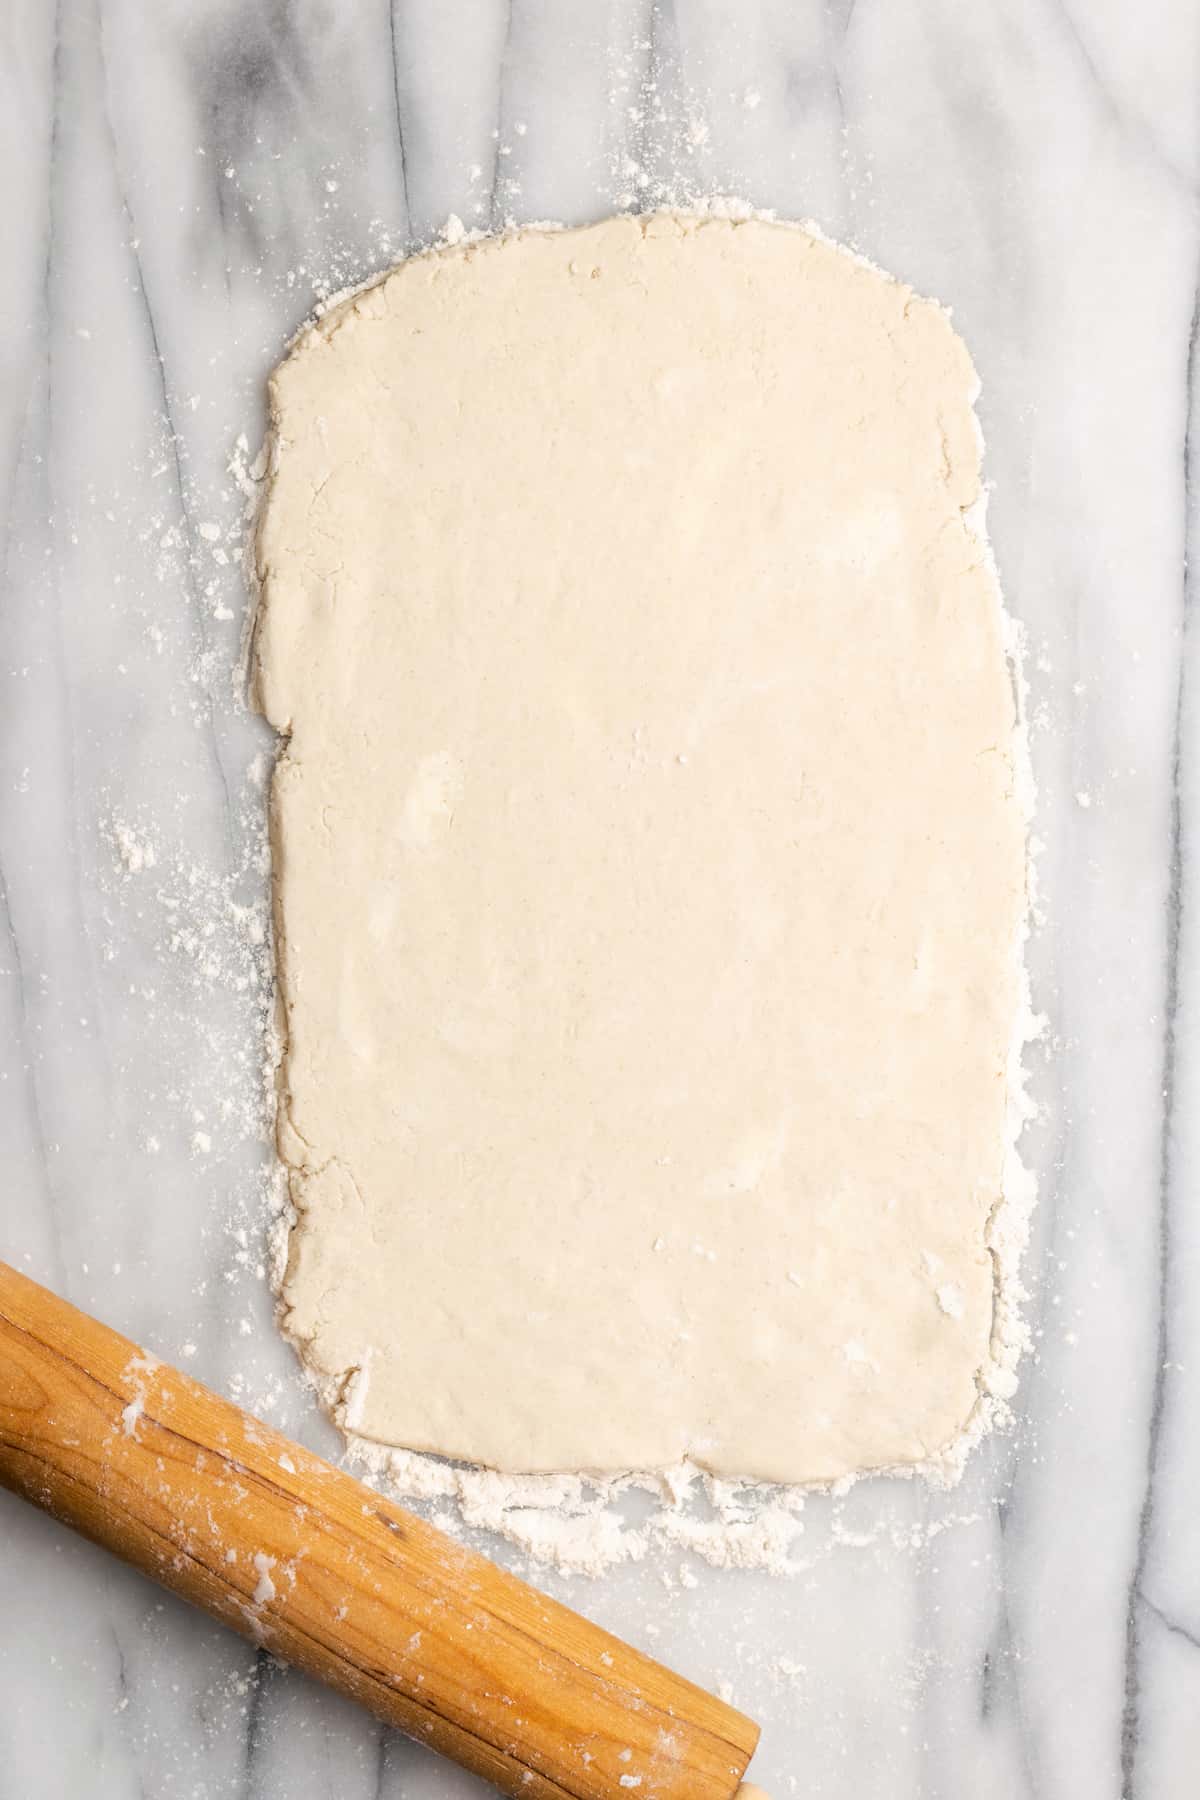 A thin rectangle of dough rolled out next to a rolling pin